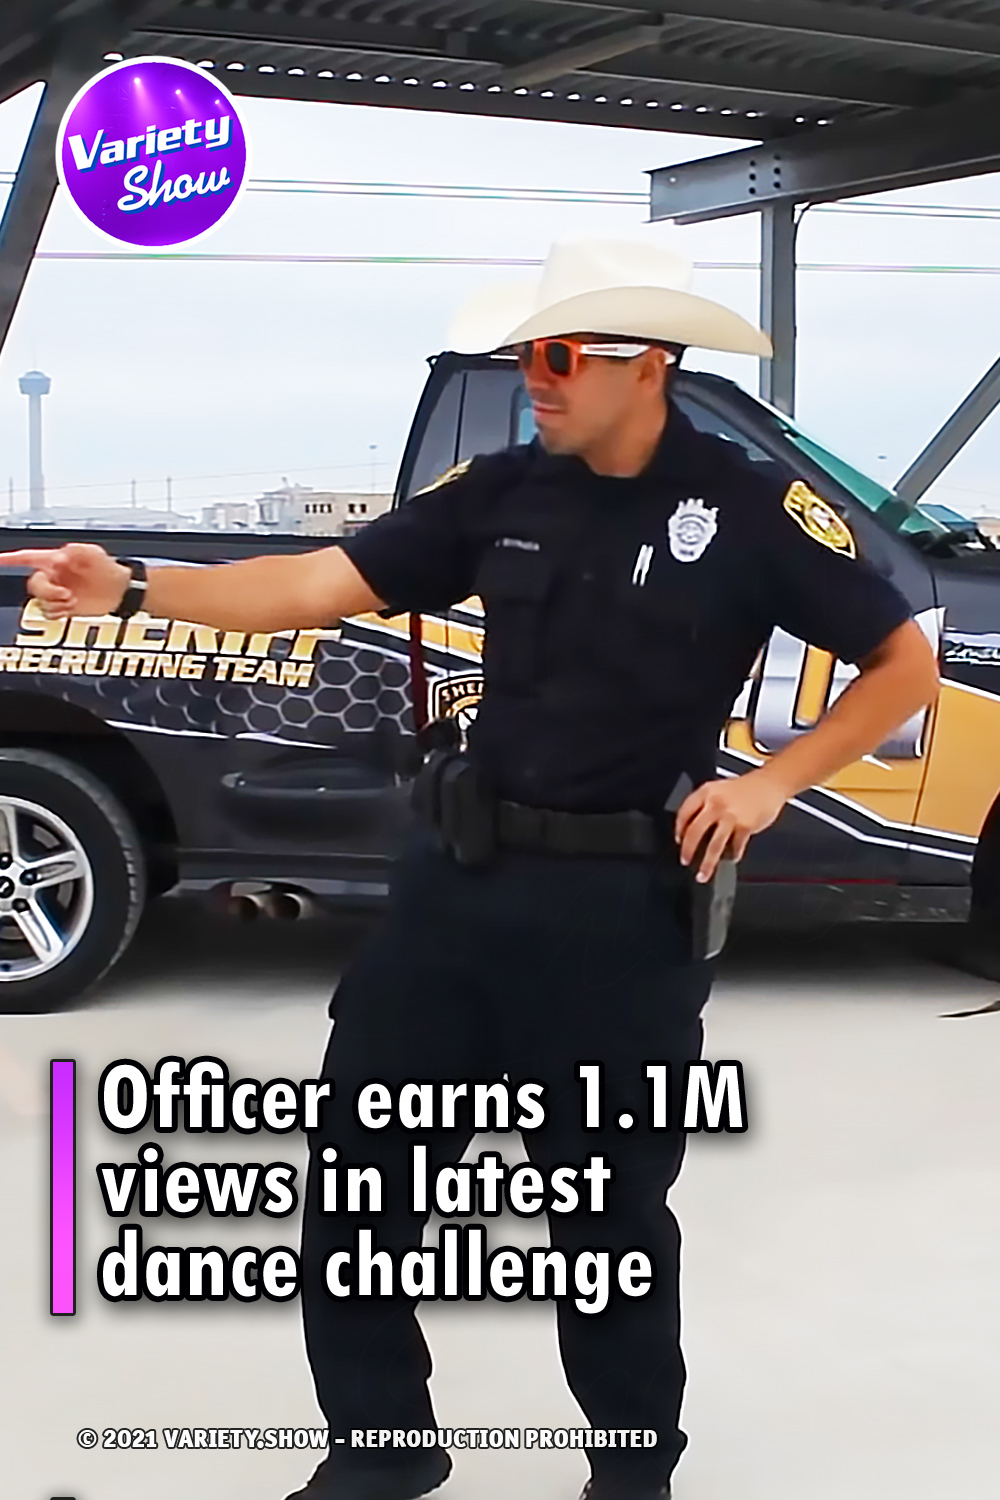 Officer earns 1.1M views in latest dance challenge